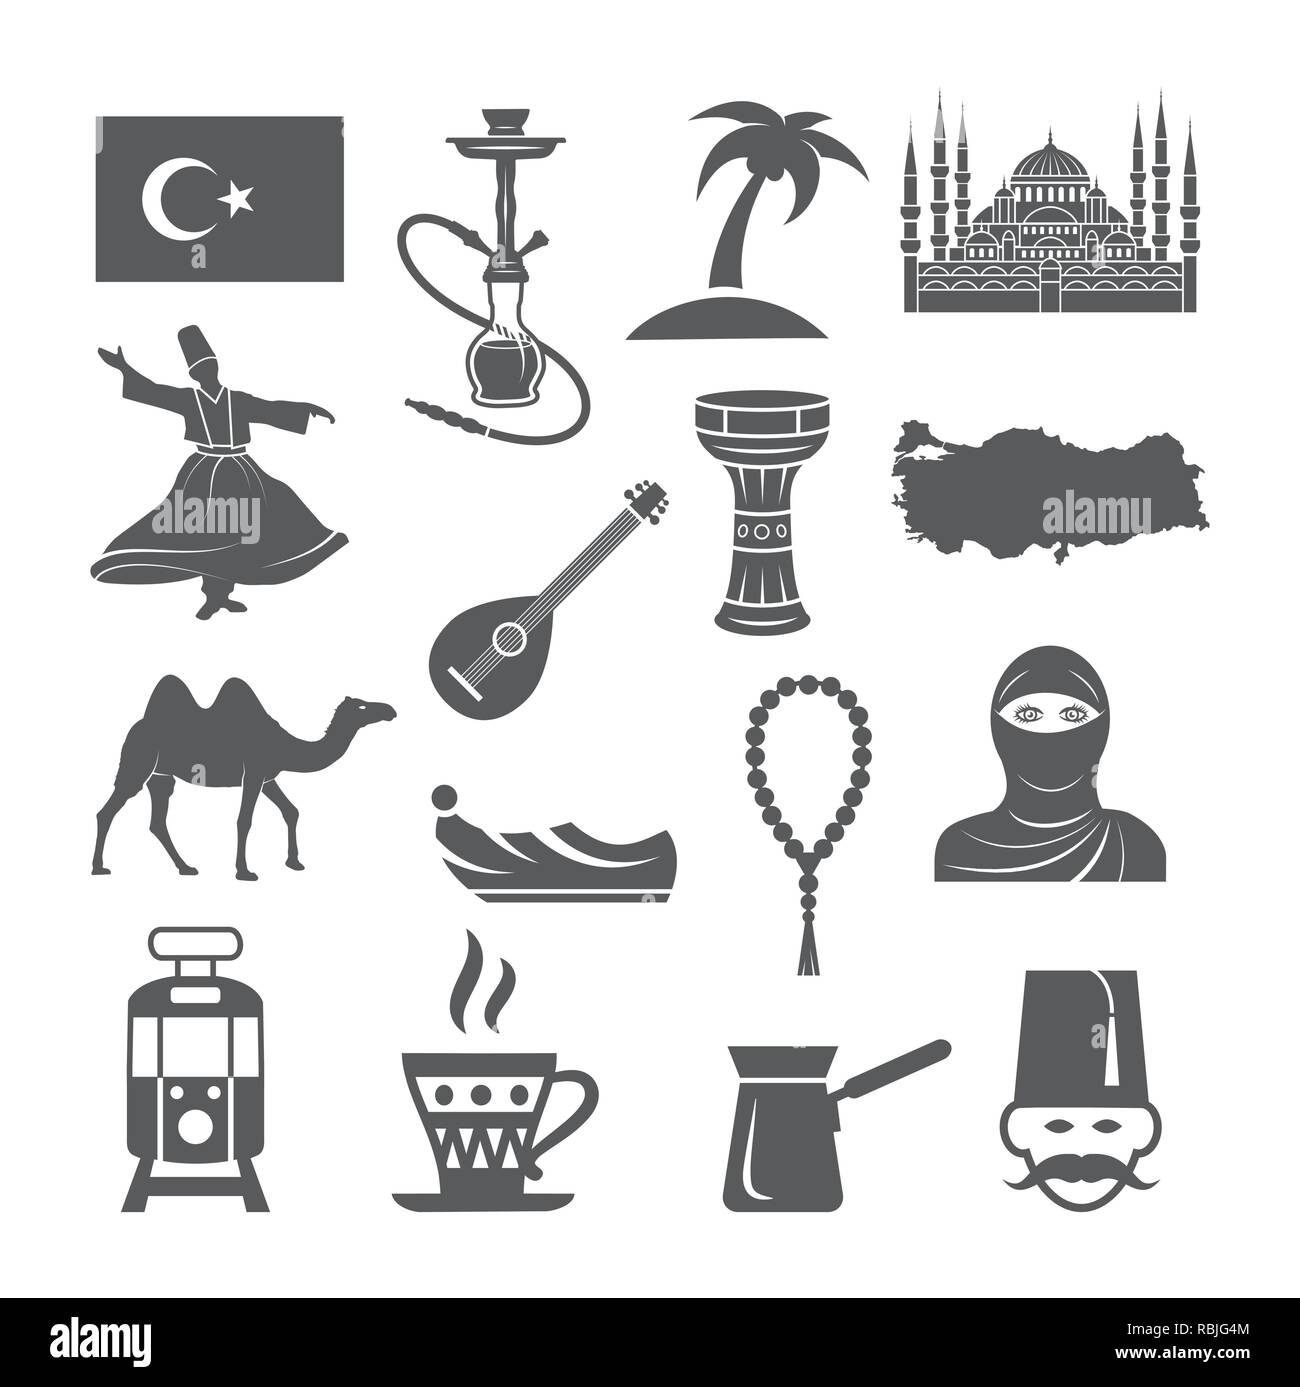 Turkey culture icons Stock Vector